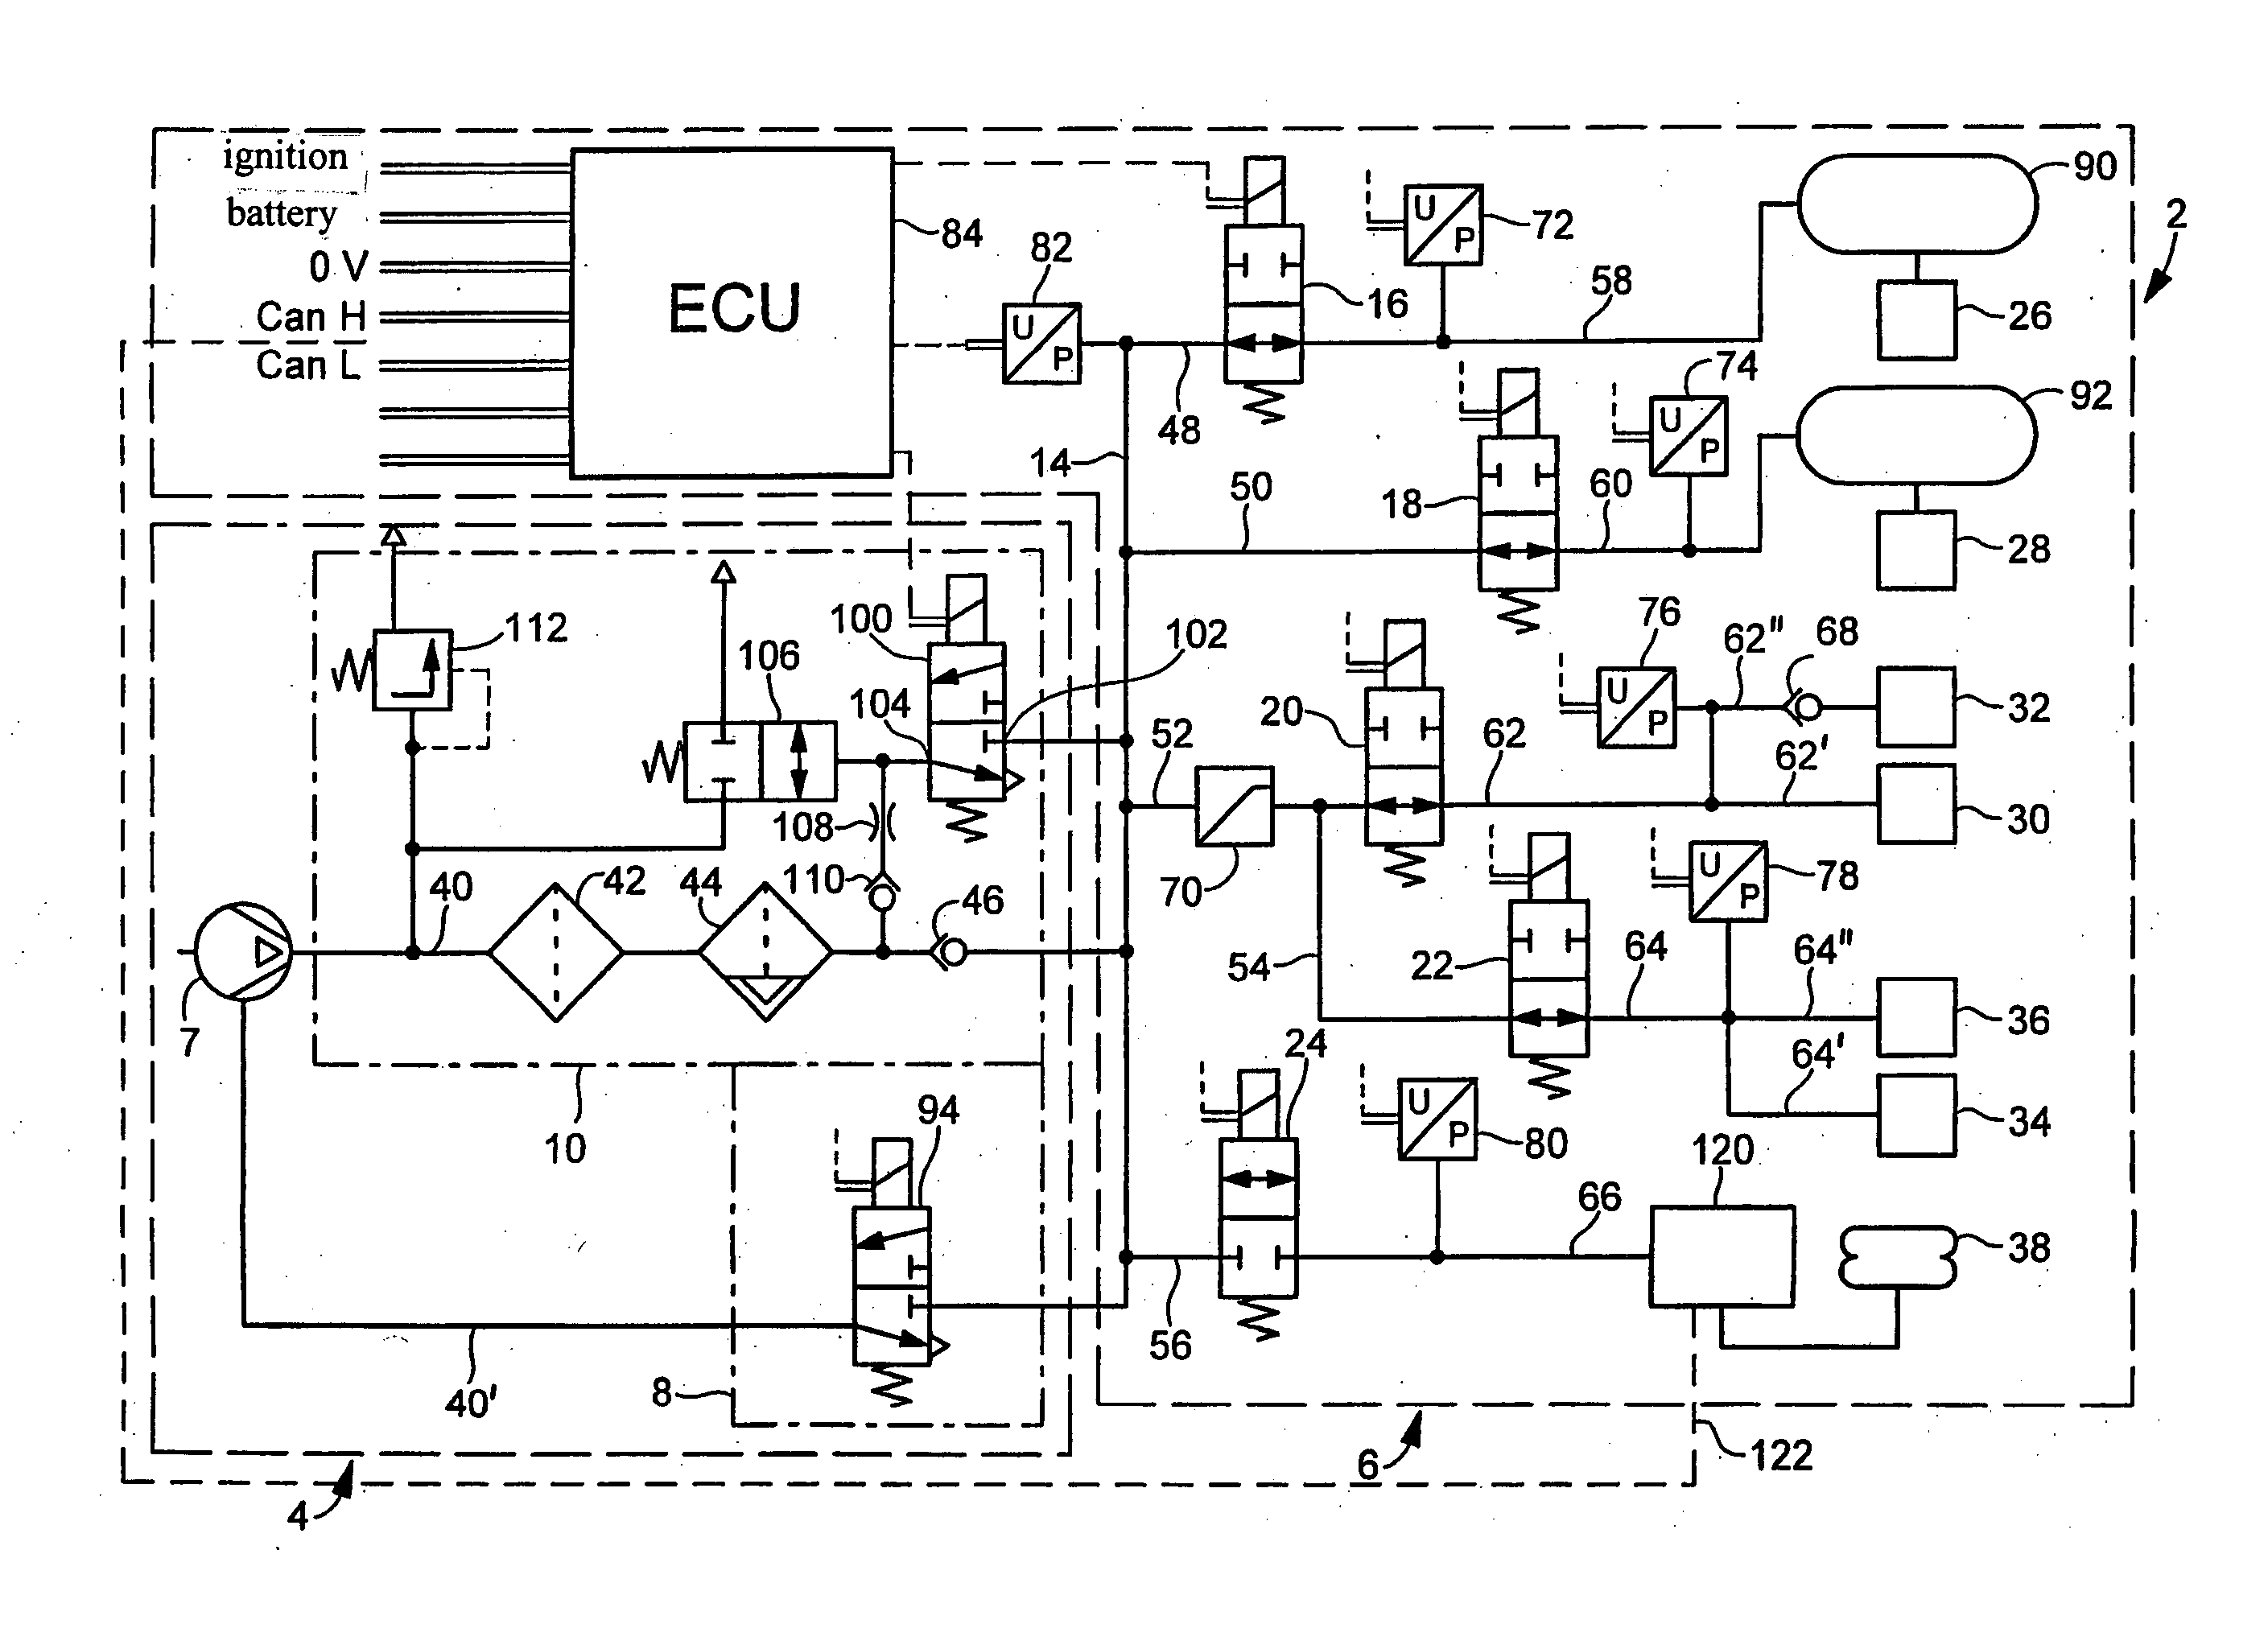 Electronic compressed air system